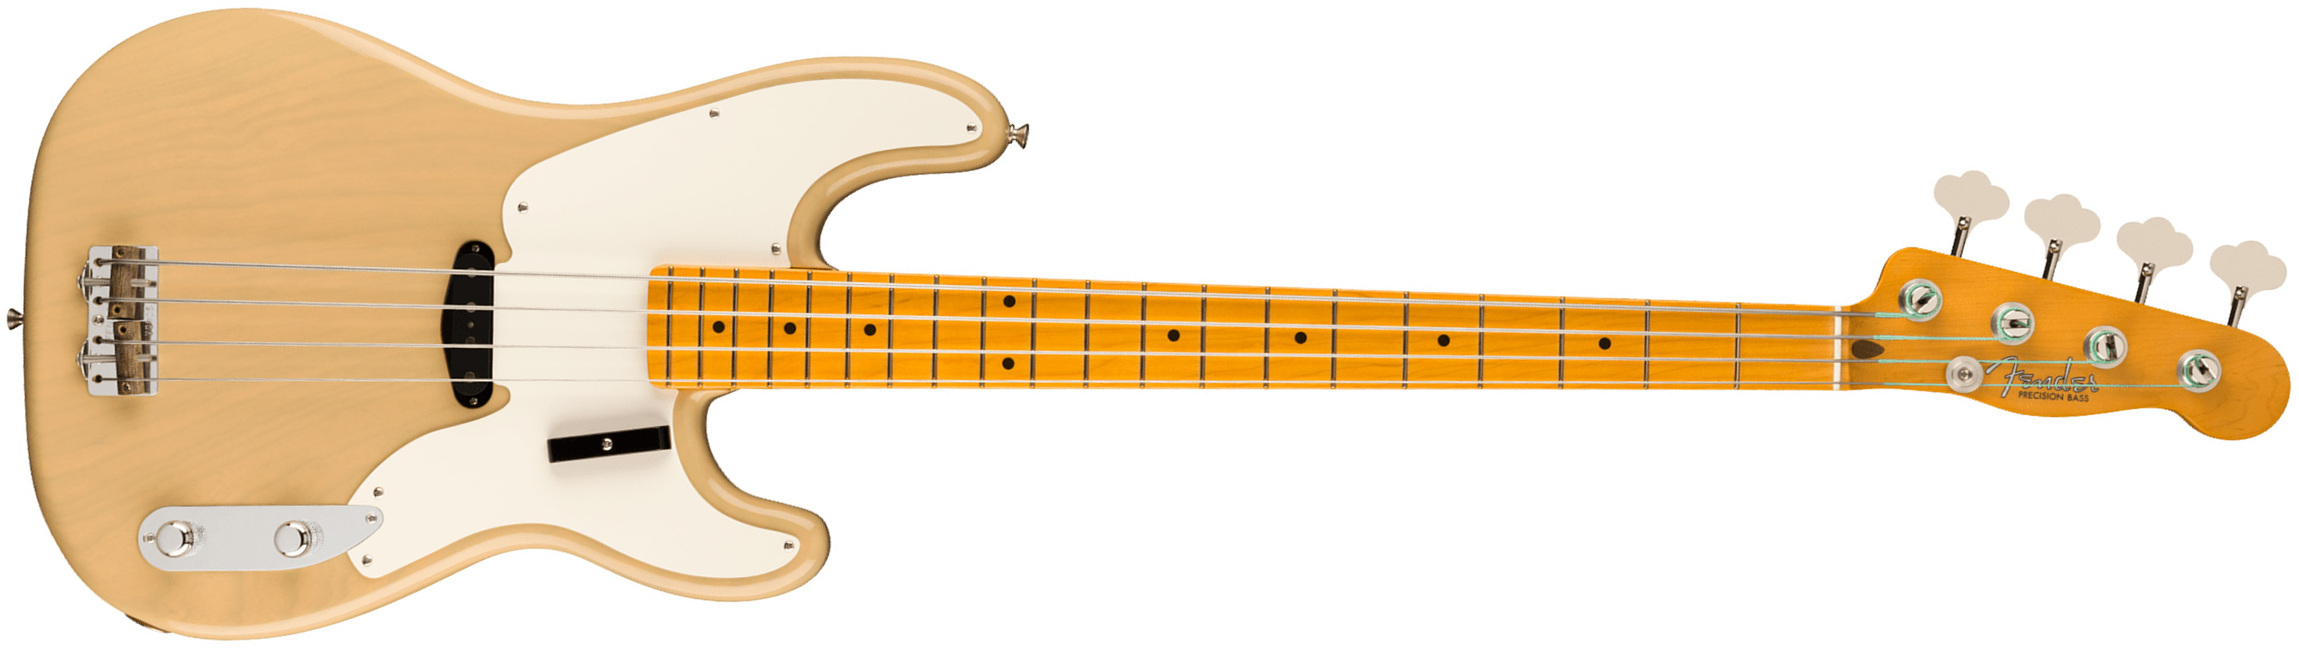 Fender Precision Bass 1954 American Vintage Ii Usa Mn - Vintage Blonde - Solidbody E-bass - Main picture